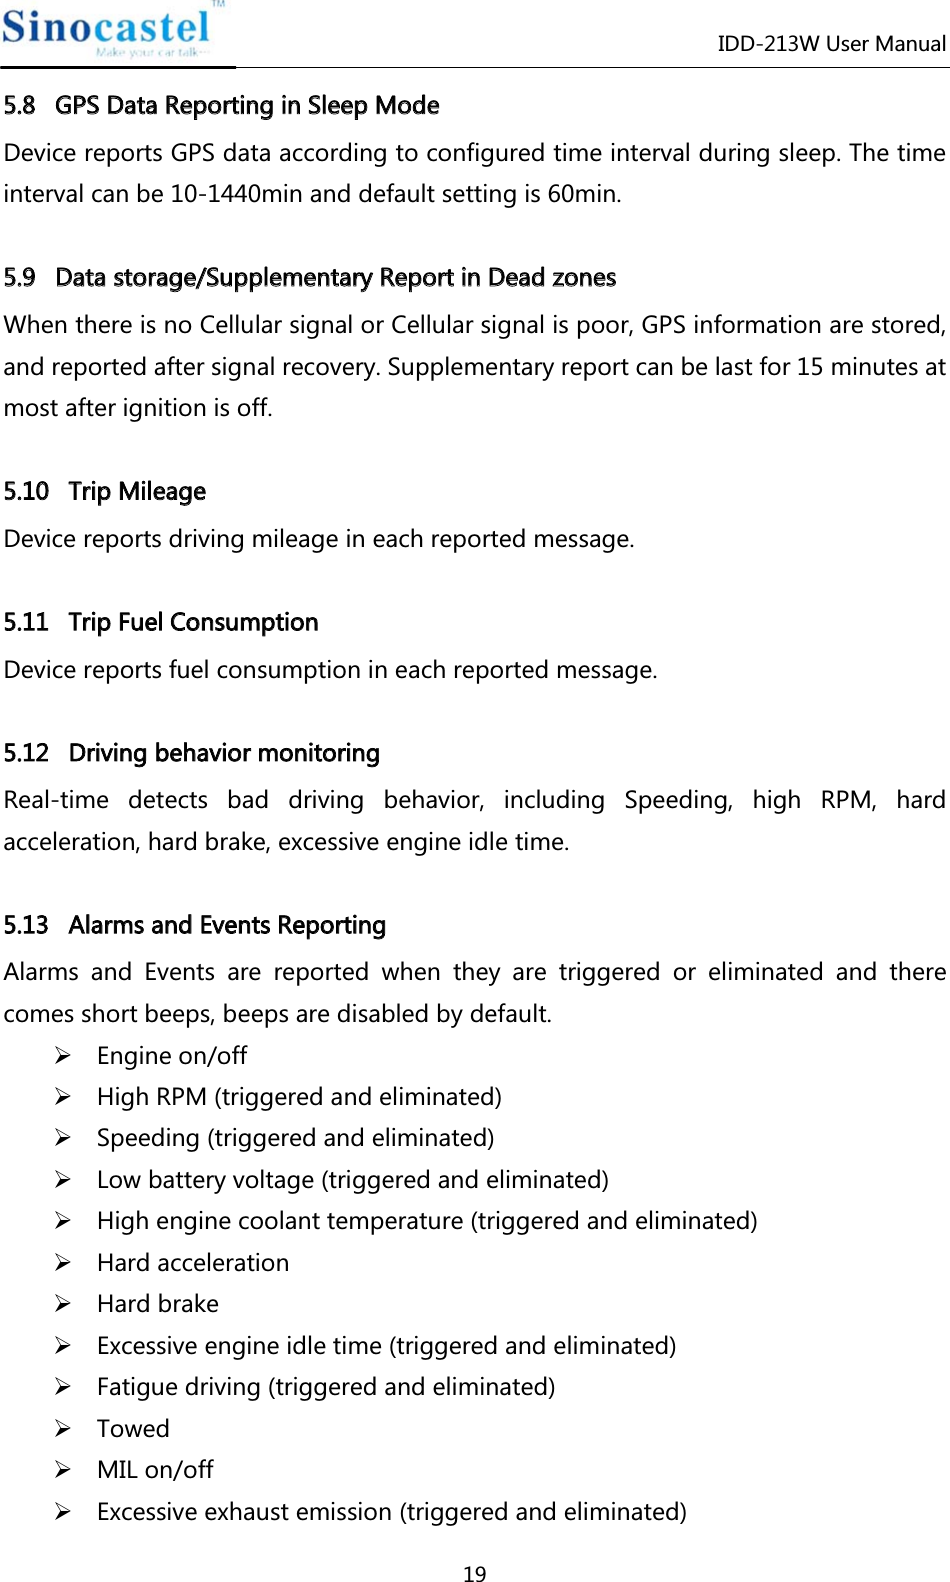 IDD-213W User Manual 19 55..88   GGPPSS  DDaattaa  RReeppoorrttiinngg  iinn  SSlleeeepp  MMooddee  Device reports GPS data according to configured time interval during sleep. The time interval can be 10-1440min and default setting is 60min.  55..99   DDaattaa  ssttoorraaggee//SSuupppplleemmeennttaarryy  RReeppoorrtt  iinn  DDeeaadd  zzoonneess  When there is no Cellular signal or Cellular signal is poor, GPS information are stored, and reported after signal recovery. Supplementary report can be last for 15 minutes at most after ignition is off.  55..1100   TTrriipp  MMiilleeaaggee  Device reports driving mileage in each reported message.  55..1111   TTrriipp  FFuueell  CCoonnssuummppttiioonn  Device reports fuel consumption in each reported message.  55..1122DDrriivviinnggbbeehhaavviioorrmmoonniittoorriinnggReal-time detects bad driving behavior, including Speeding, high RPM, hard acceleration, hard brake, excessive engine idle time.  55..1133   AAllaarrmmss  aanndd  EEvveennttss  RReeppoorrttiinngg  Alarms and Events are reported when they are triggered or eliminated and there comes short beeps, beeps are disabled by default. ¾ Engine on/off ¾ High RPM (triggered and eliminated) ¾ Speeding (triggered and eliminated) ¾ Low battery voltage (triggered and eliminated) ¾ High engine coolant temperature (triggered and eliminated) ¾ Hard acceleration ¾ Hard brake ¾ Excessive engine idle time (triggered and eliminated) ¾ Fatigue driving (triggered and eliminated) ¾ Towed ¾ MIL on/off ¾ Excessive exhaust emission (triggered and eliminated) 